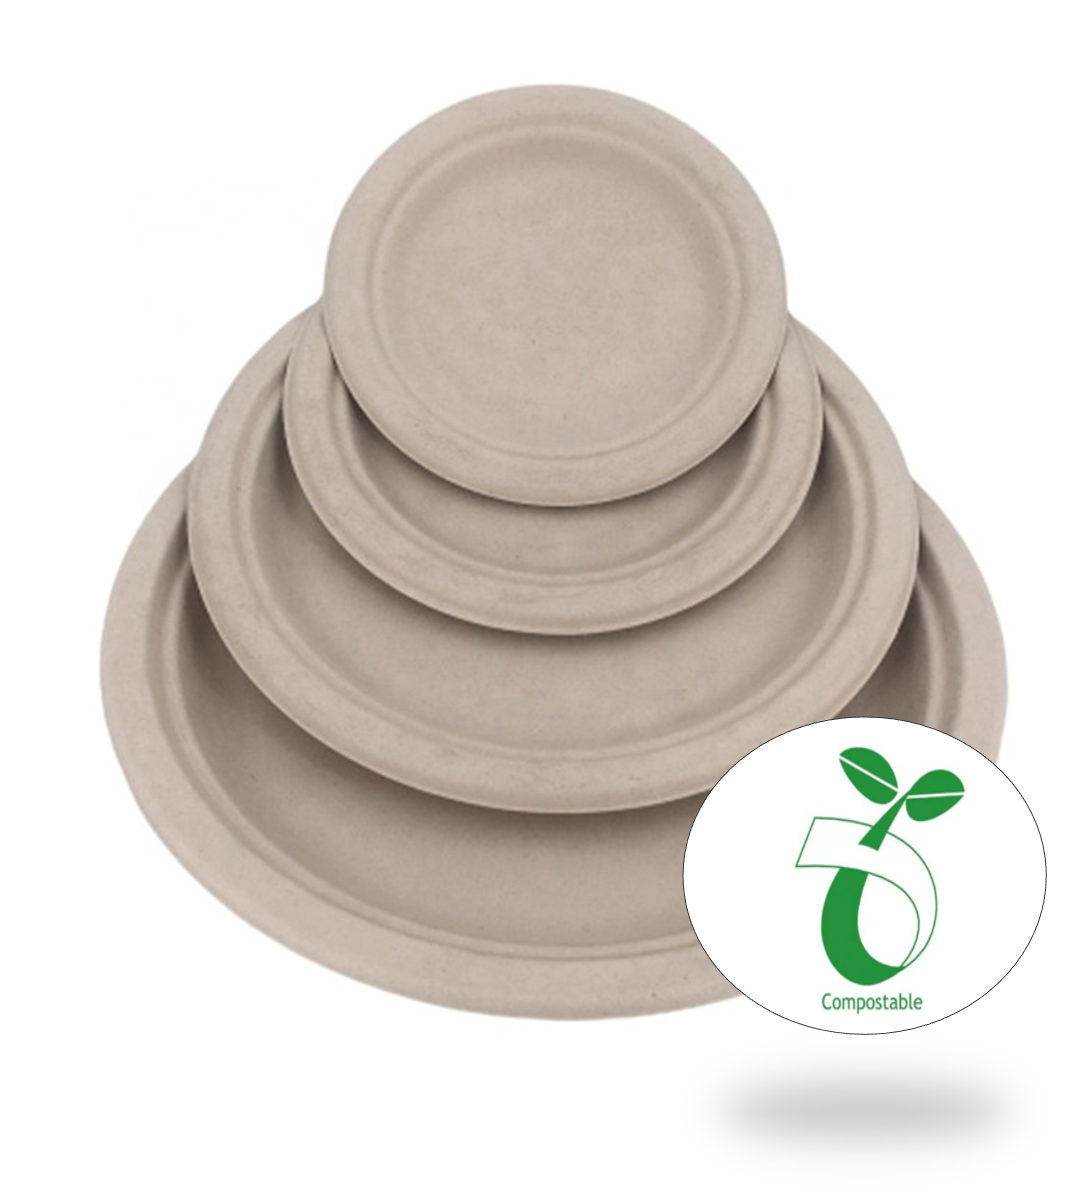 Reduce landfill with these premium biodegradable 10-inch Round Bagasse Molded Plates constructed with sugarcane fibers.